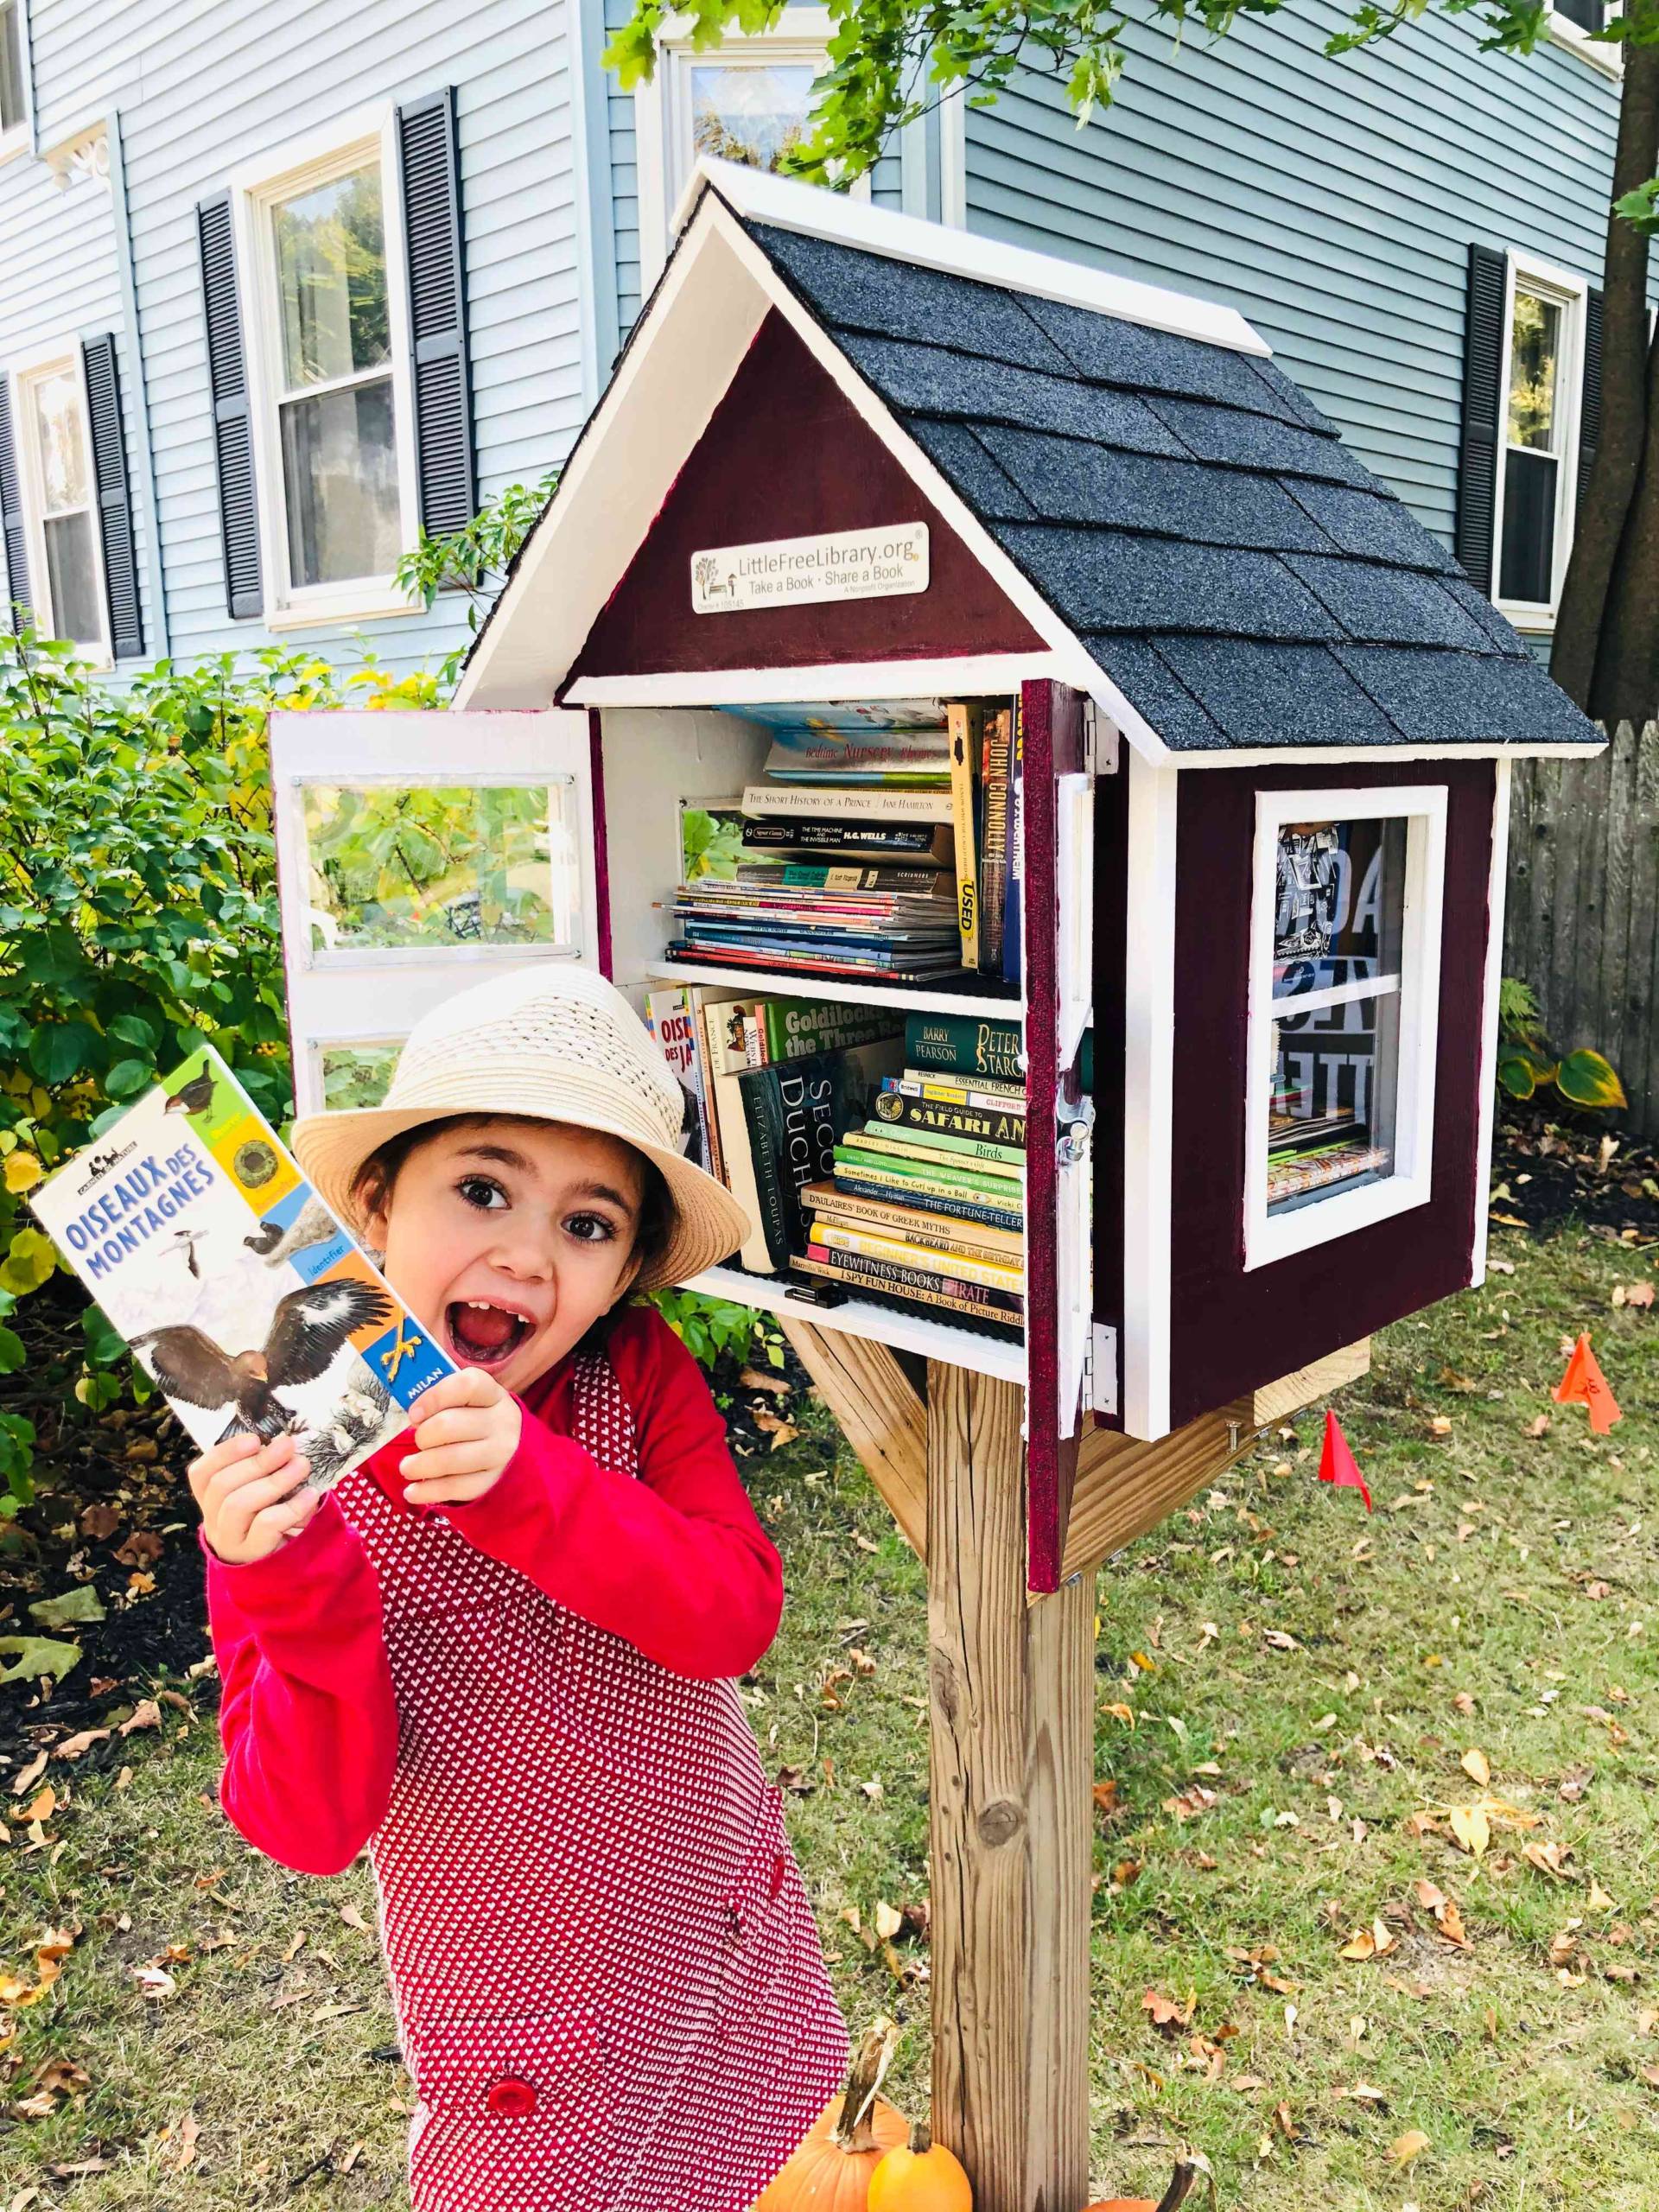 How Many Little Free Libraries Are There